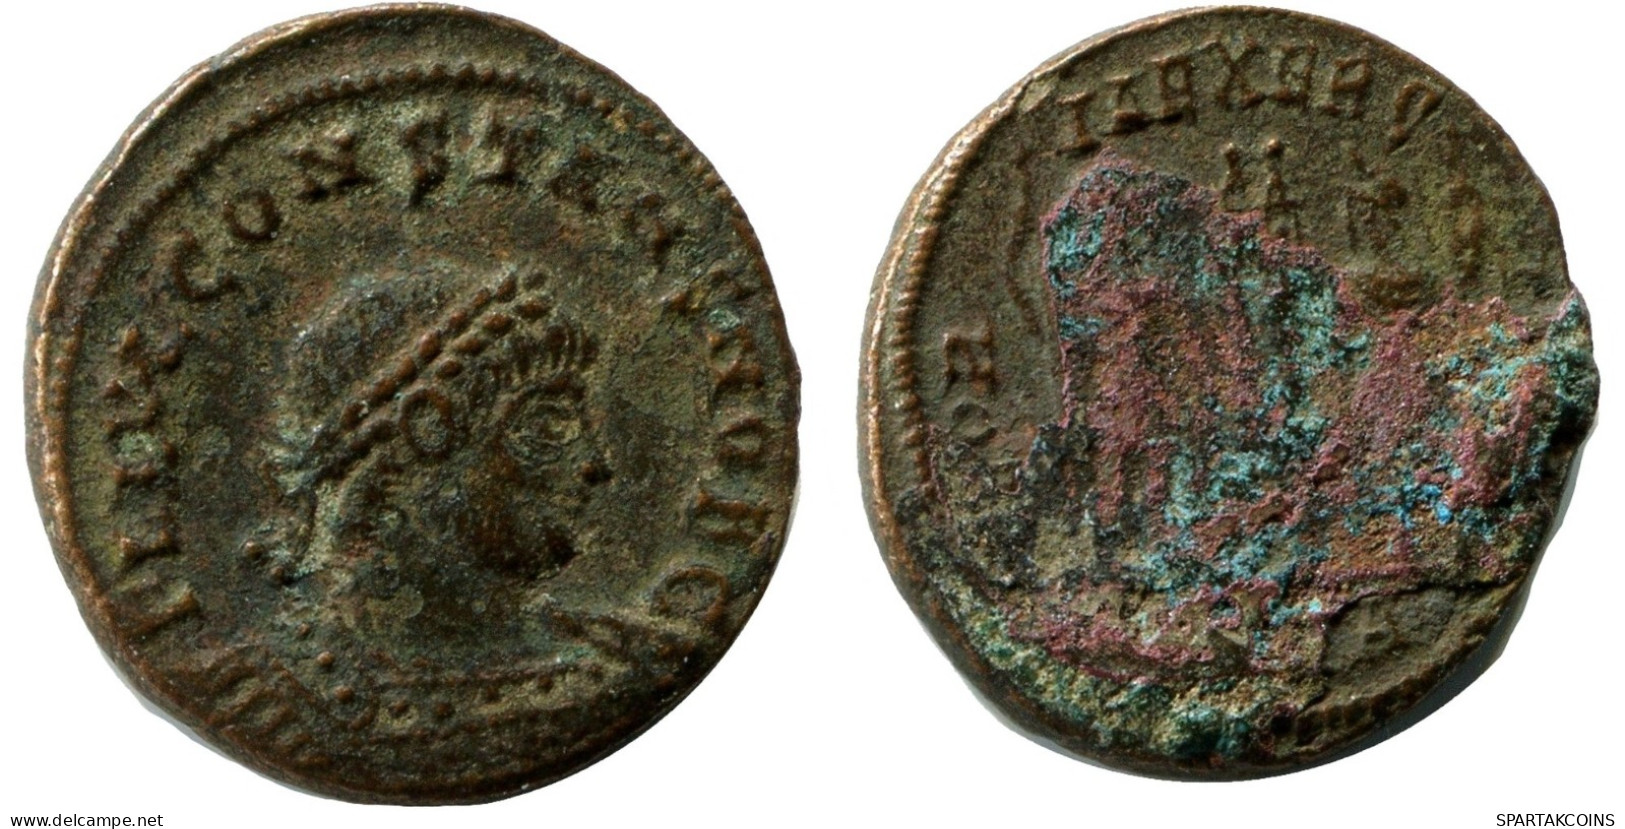 CONSTANS MINTED IN ALEKSANDRIA FOUND IN IHNASYAH HOARD EGYPT #ANC11462.14.E.A - The Christian Empire (307 AD Tot 363 AD)